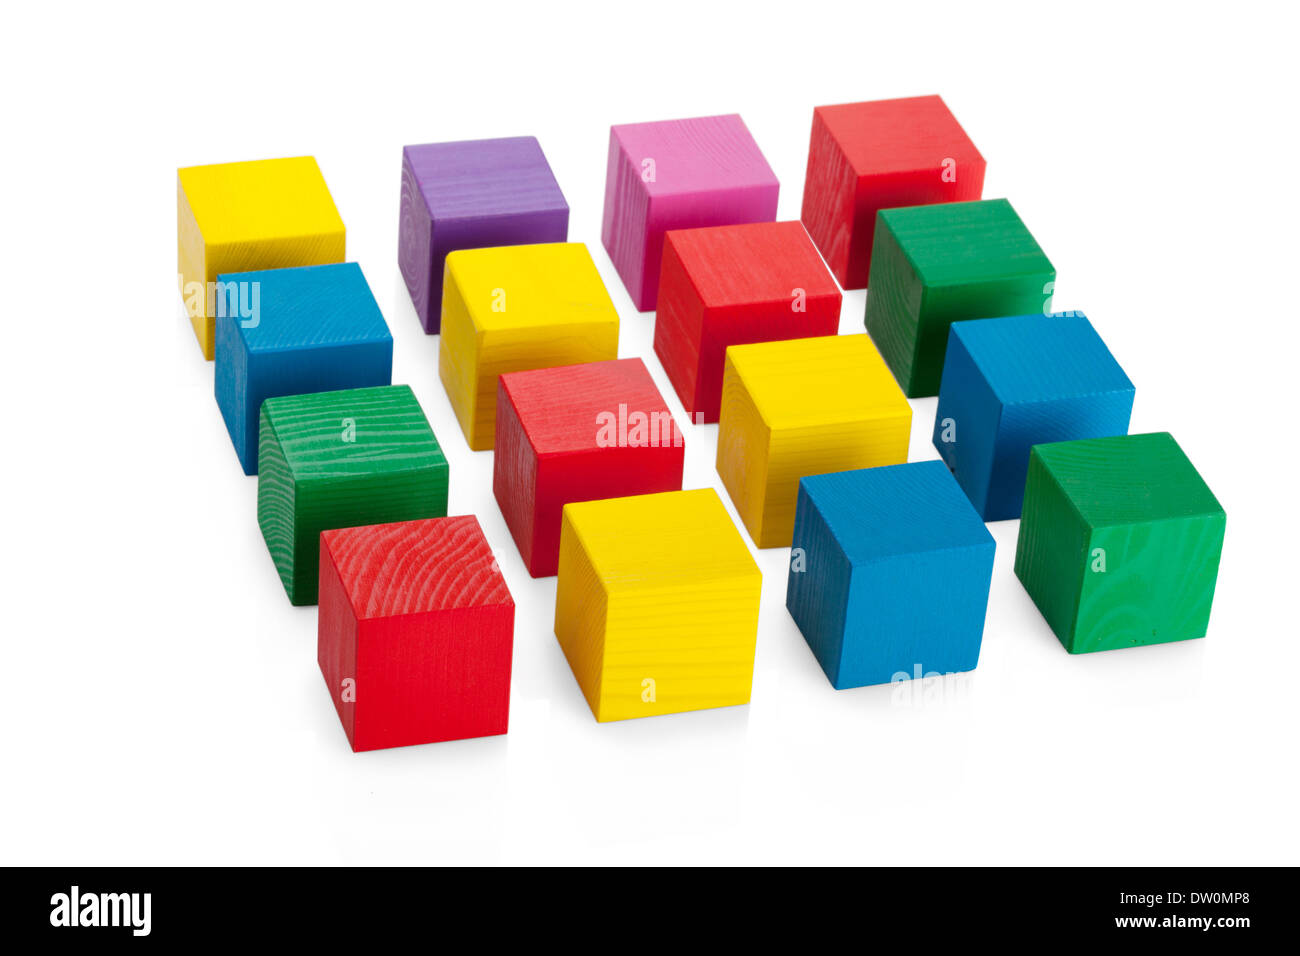 4*4 square of wooden toy cubes isolated on white background Stock Photo